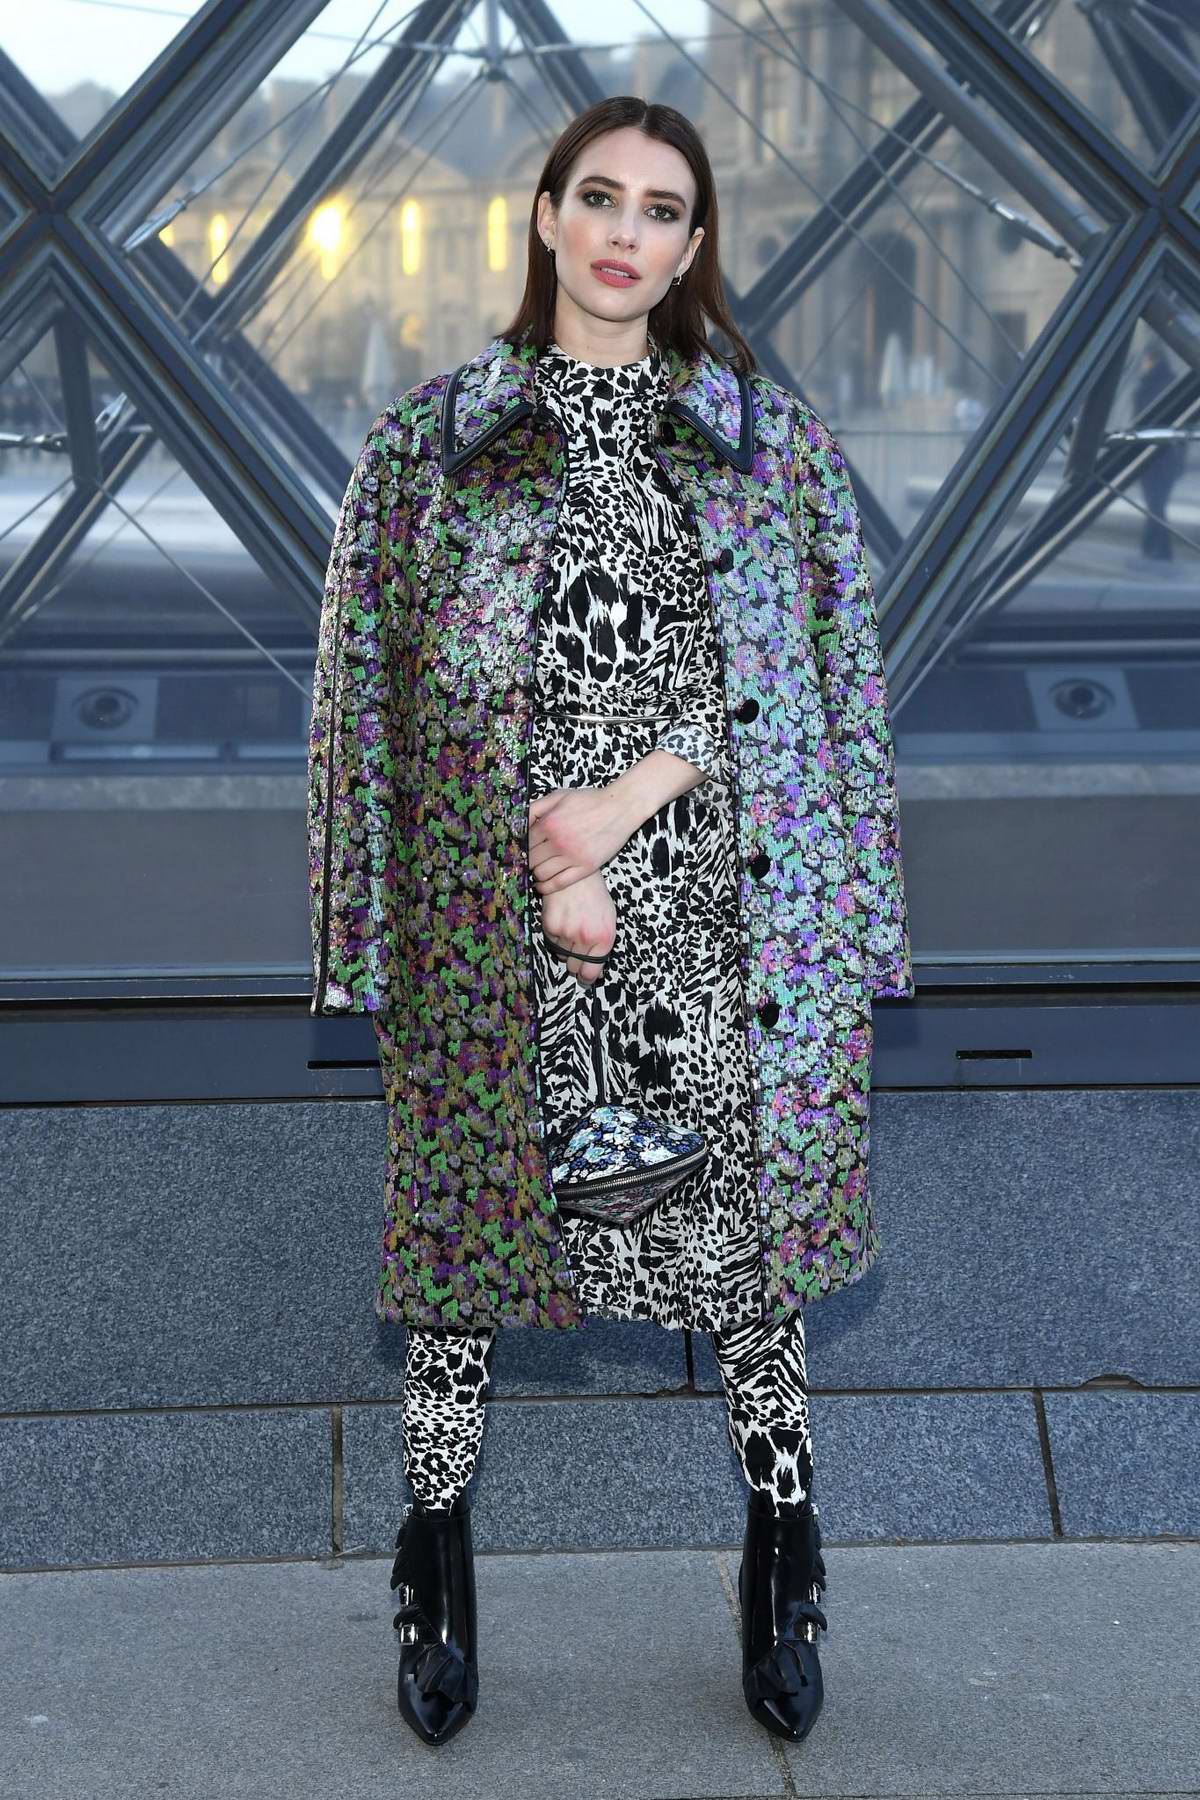 Emma Roberts attends the Louis Vuitton show during Paris Fashion Week F/W  2019/20 in